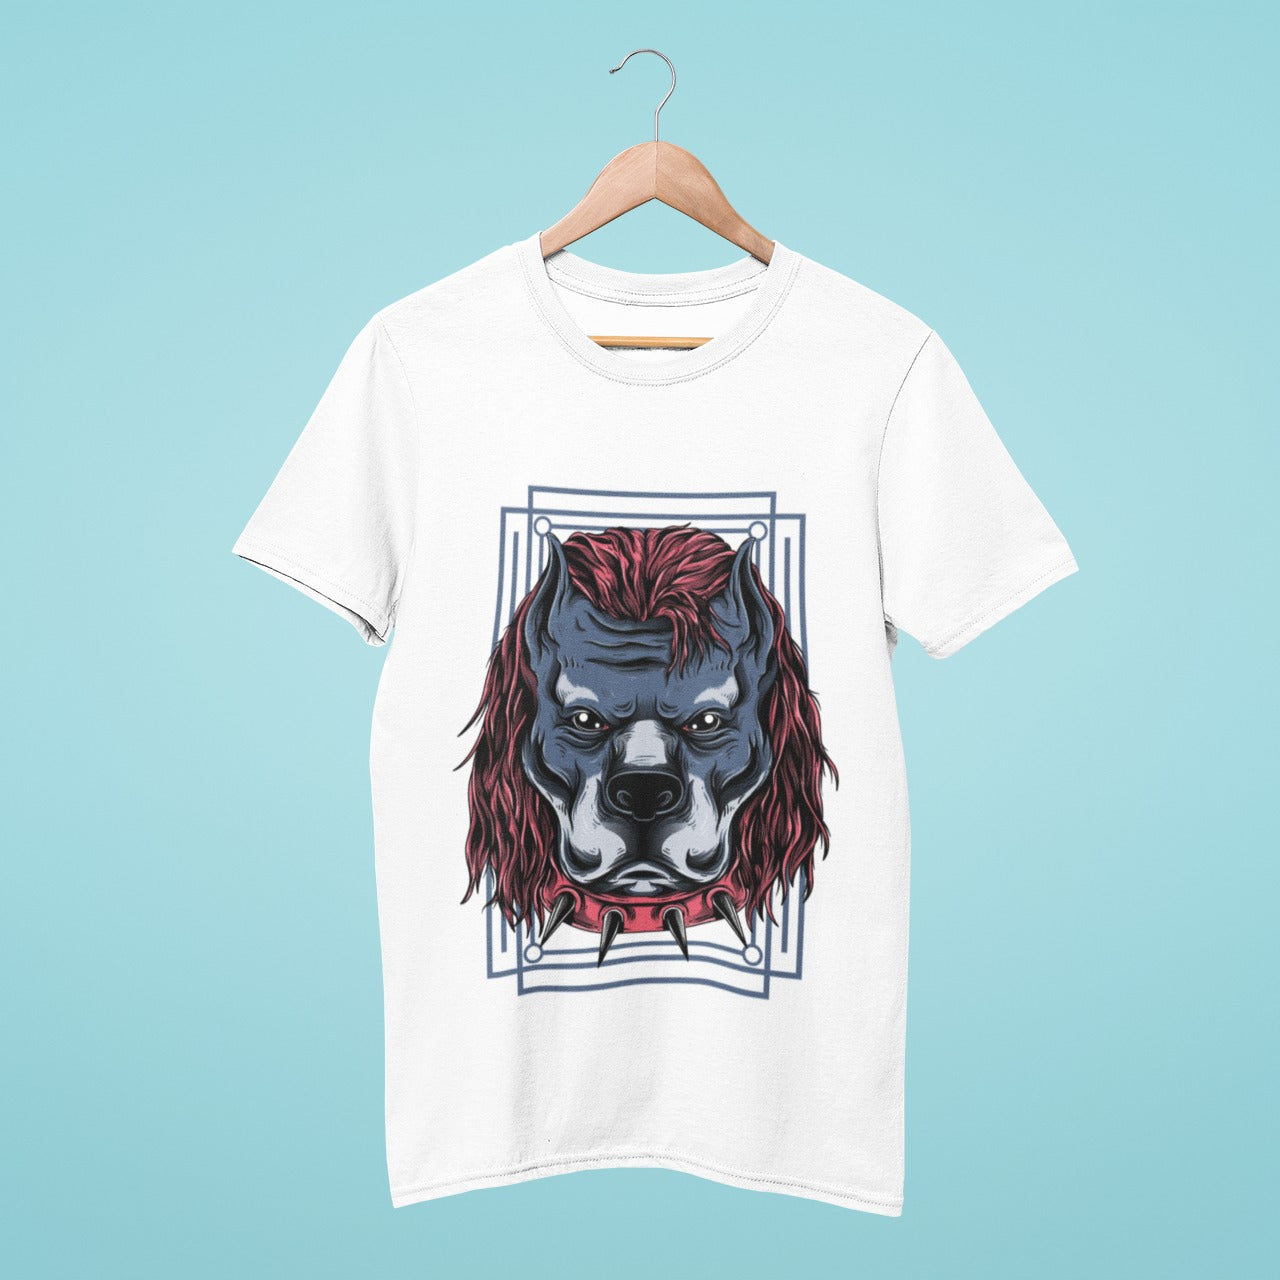 This white t-shirt features a grey-blue bulldog with a red-maroon lion-like mane, giving a serious and fierce look. With this unique design, you can show off your love for bulldogs and make a statement. Made with high-quality materials, this t-shirt is comfortable and durable, making it perfect for everyday wear. Get your hands on this unique and eye-catching shirt today!